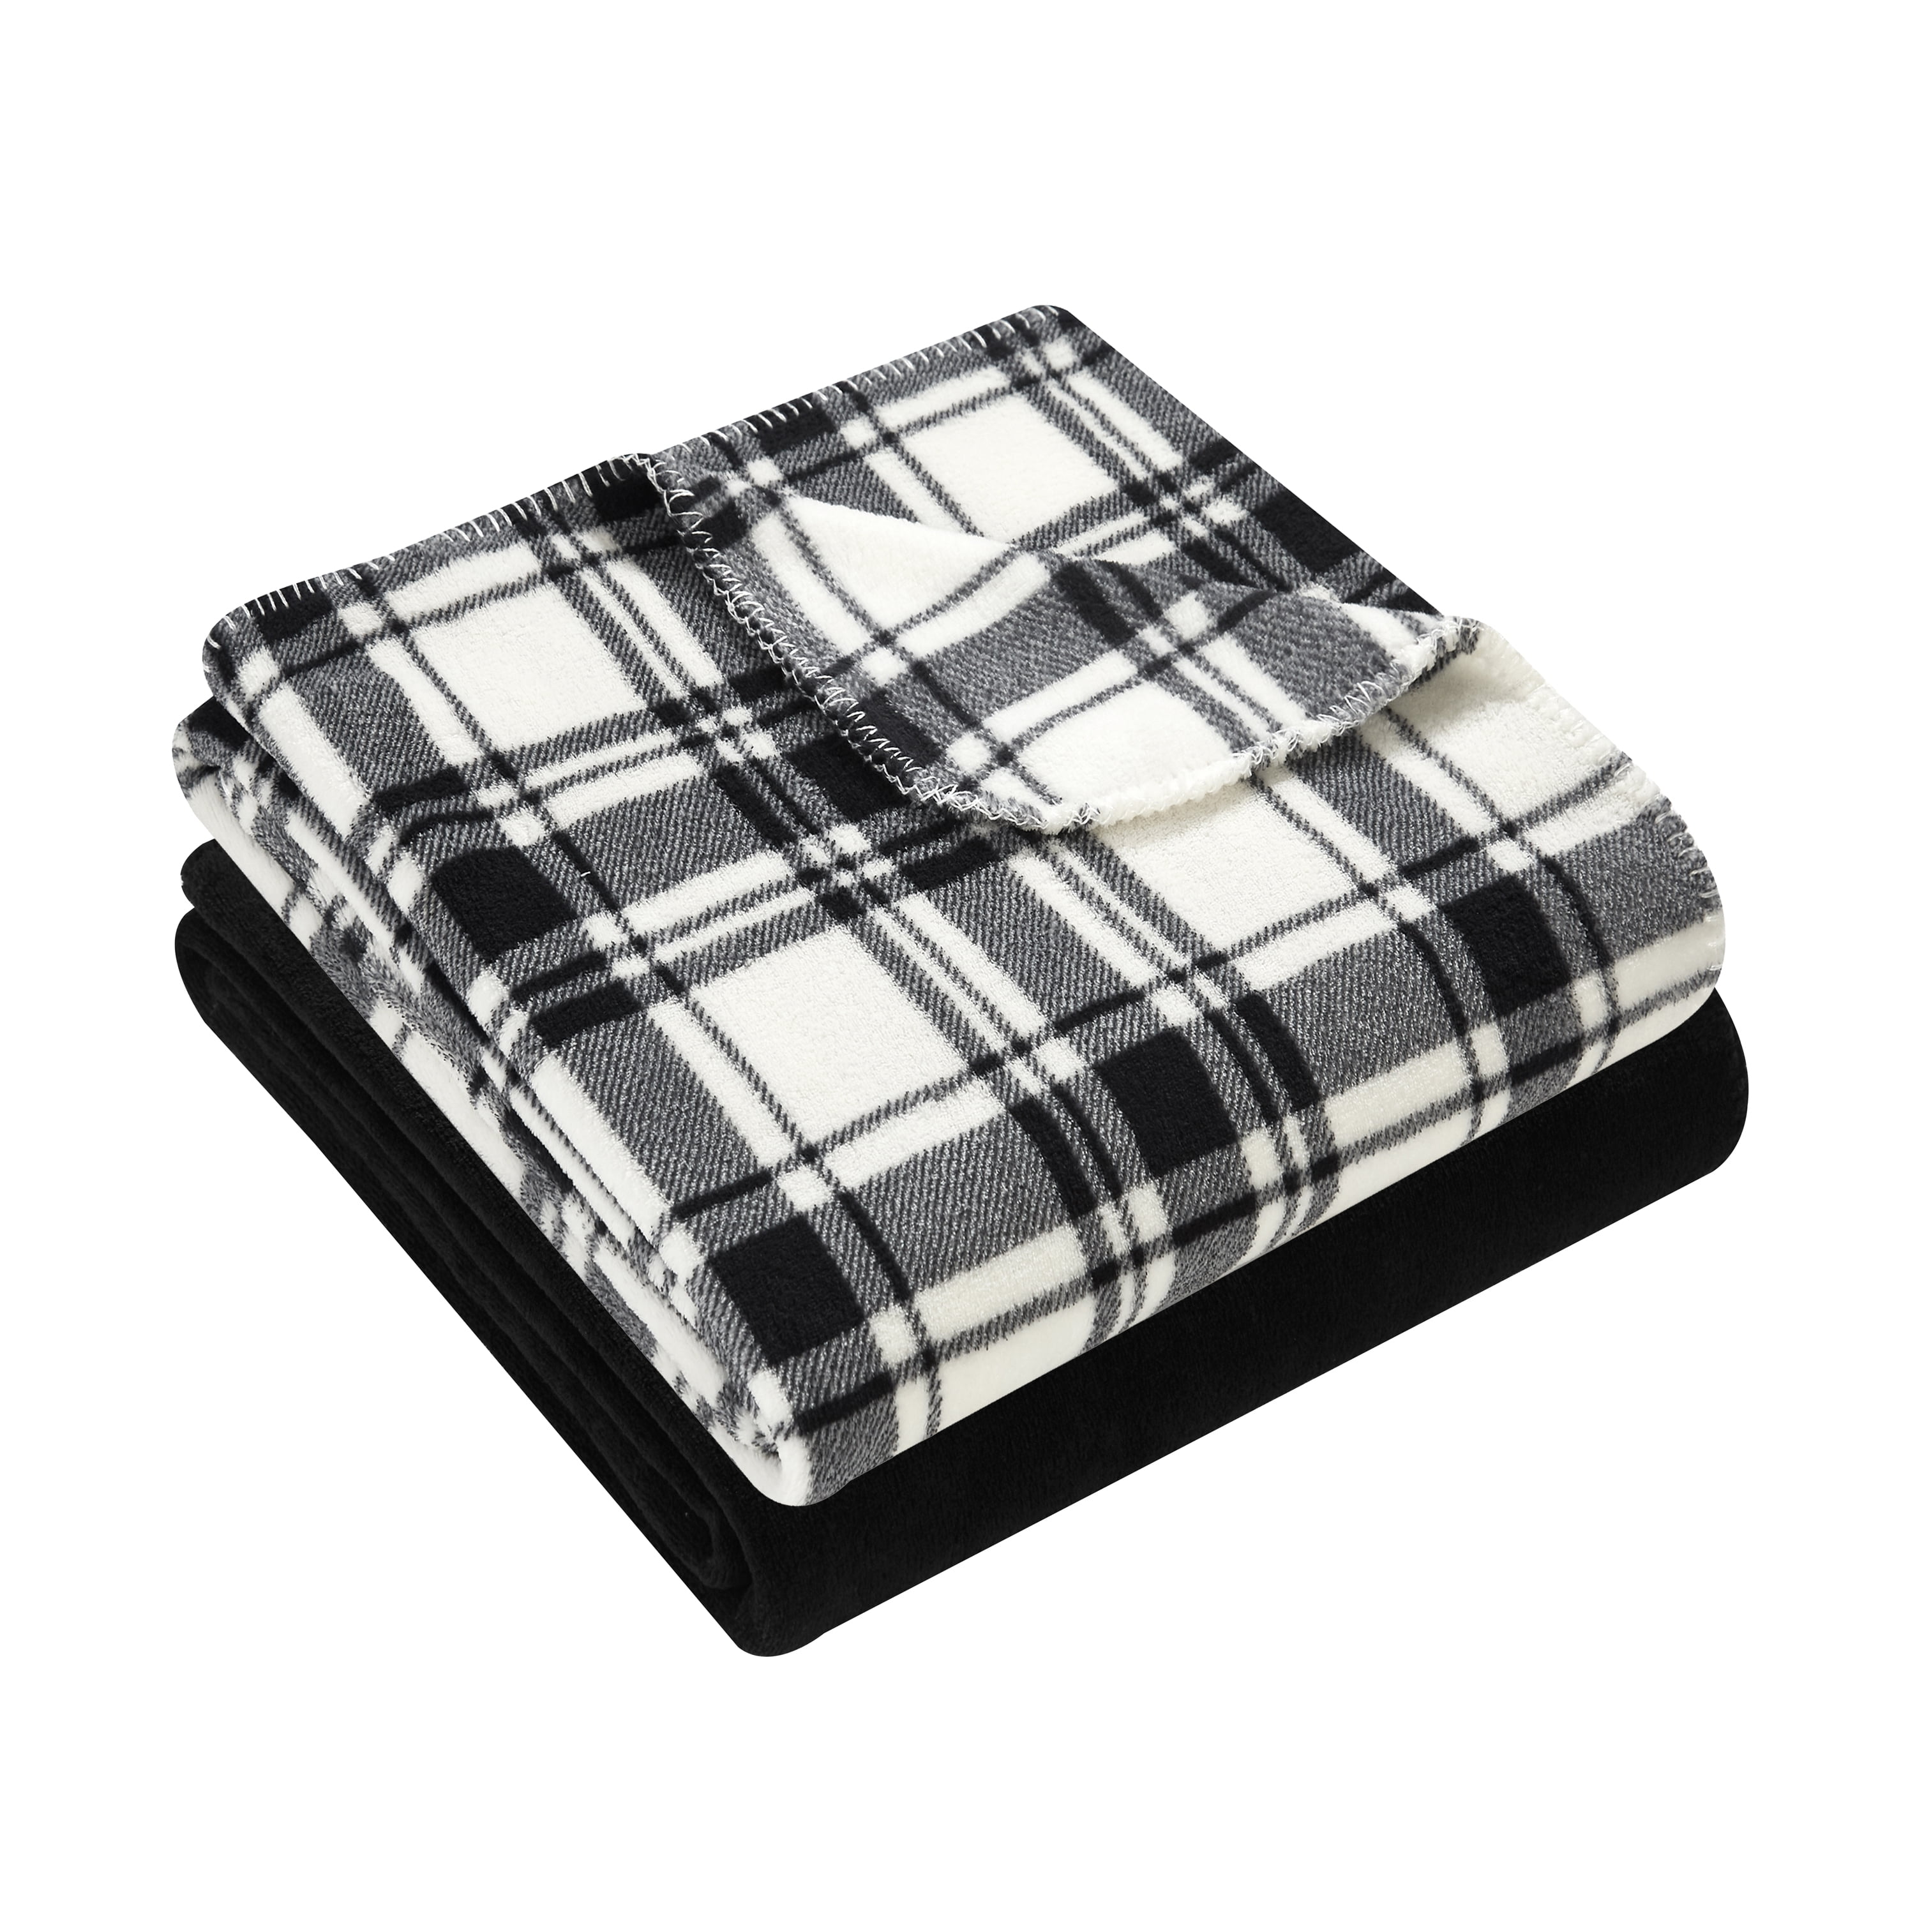 Spice Breathable and Machine Washable Bedford Home Oversized Vintage Look Woven Acrylic Faux Cashmere-Feel Plaid Throw